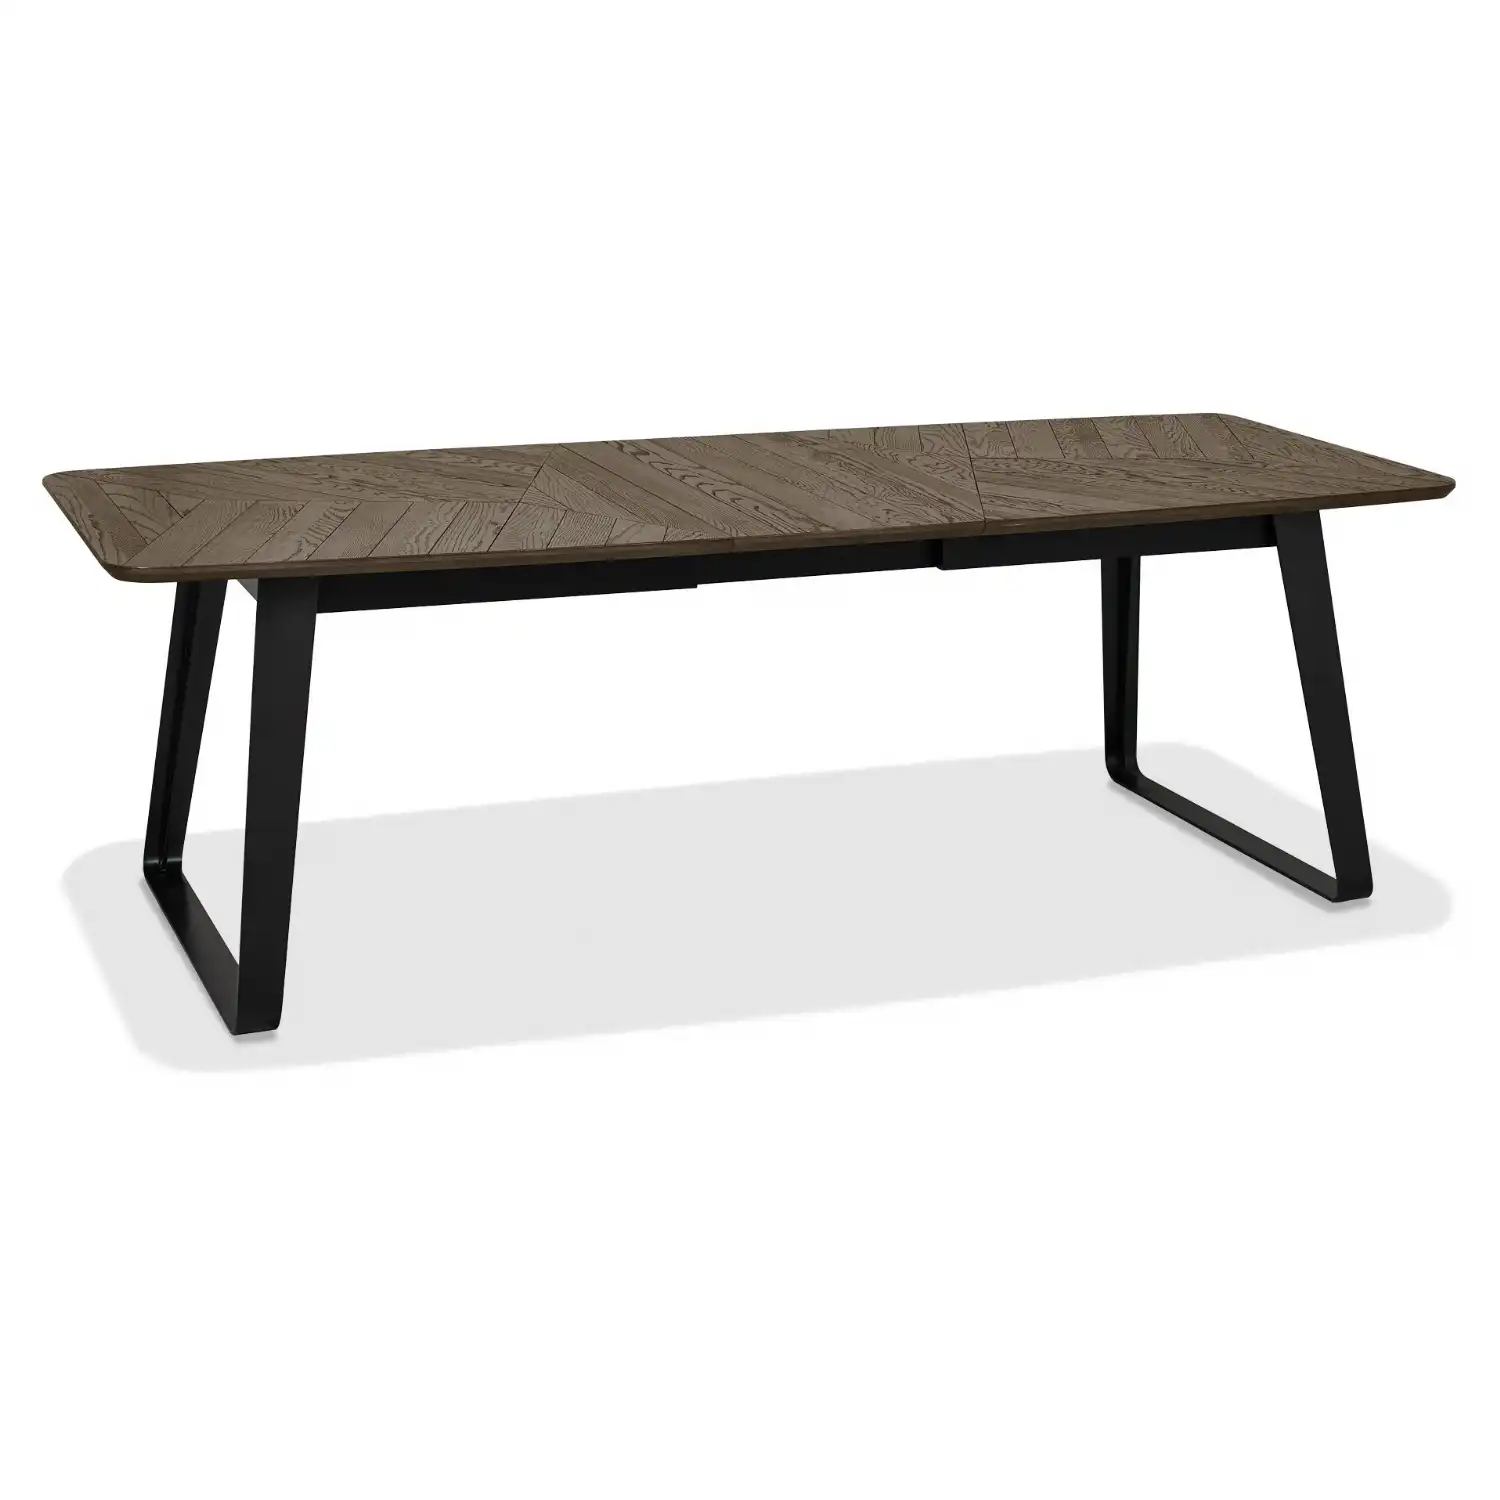 Weathered Oak and Black Metal Large Extending Dining Table